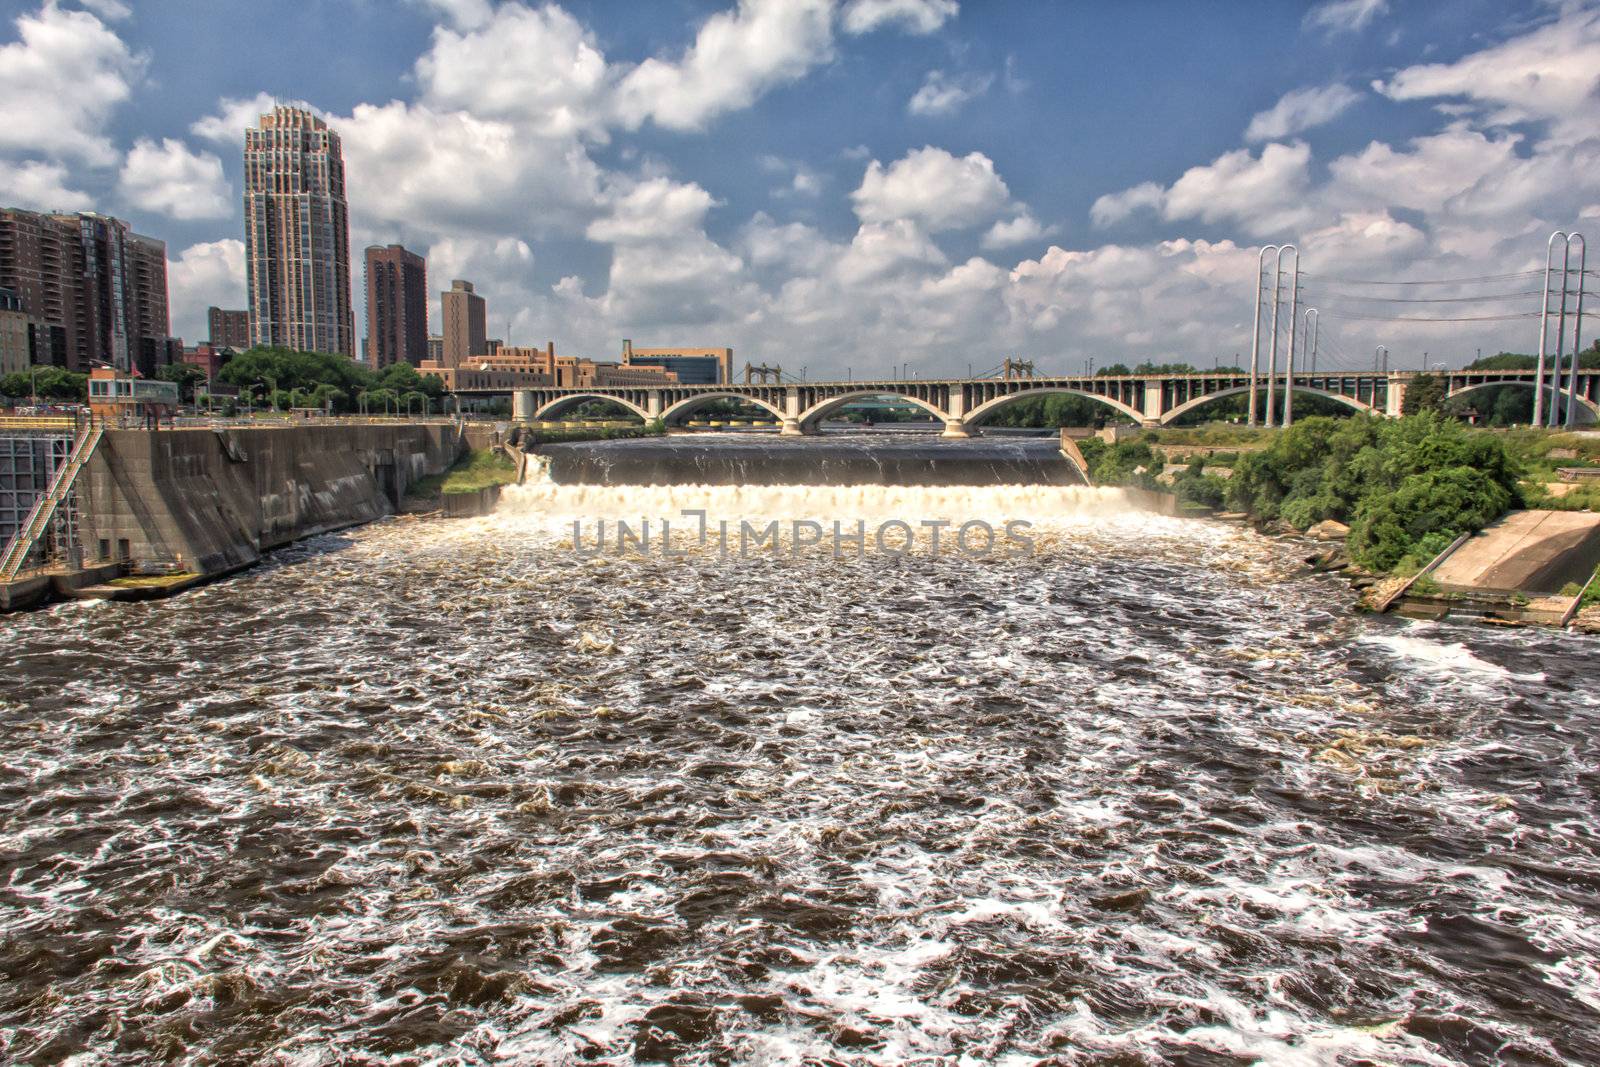 Water flows over the St. Anthony Dam in downtown Minneapolis, Minnesota